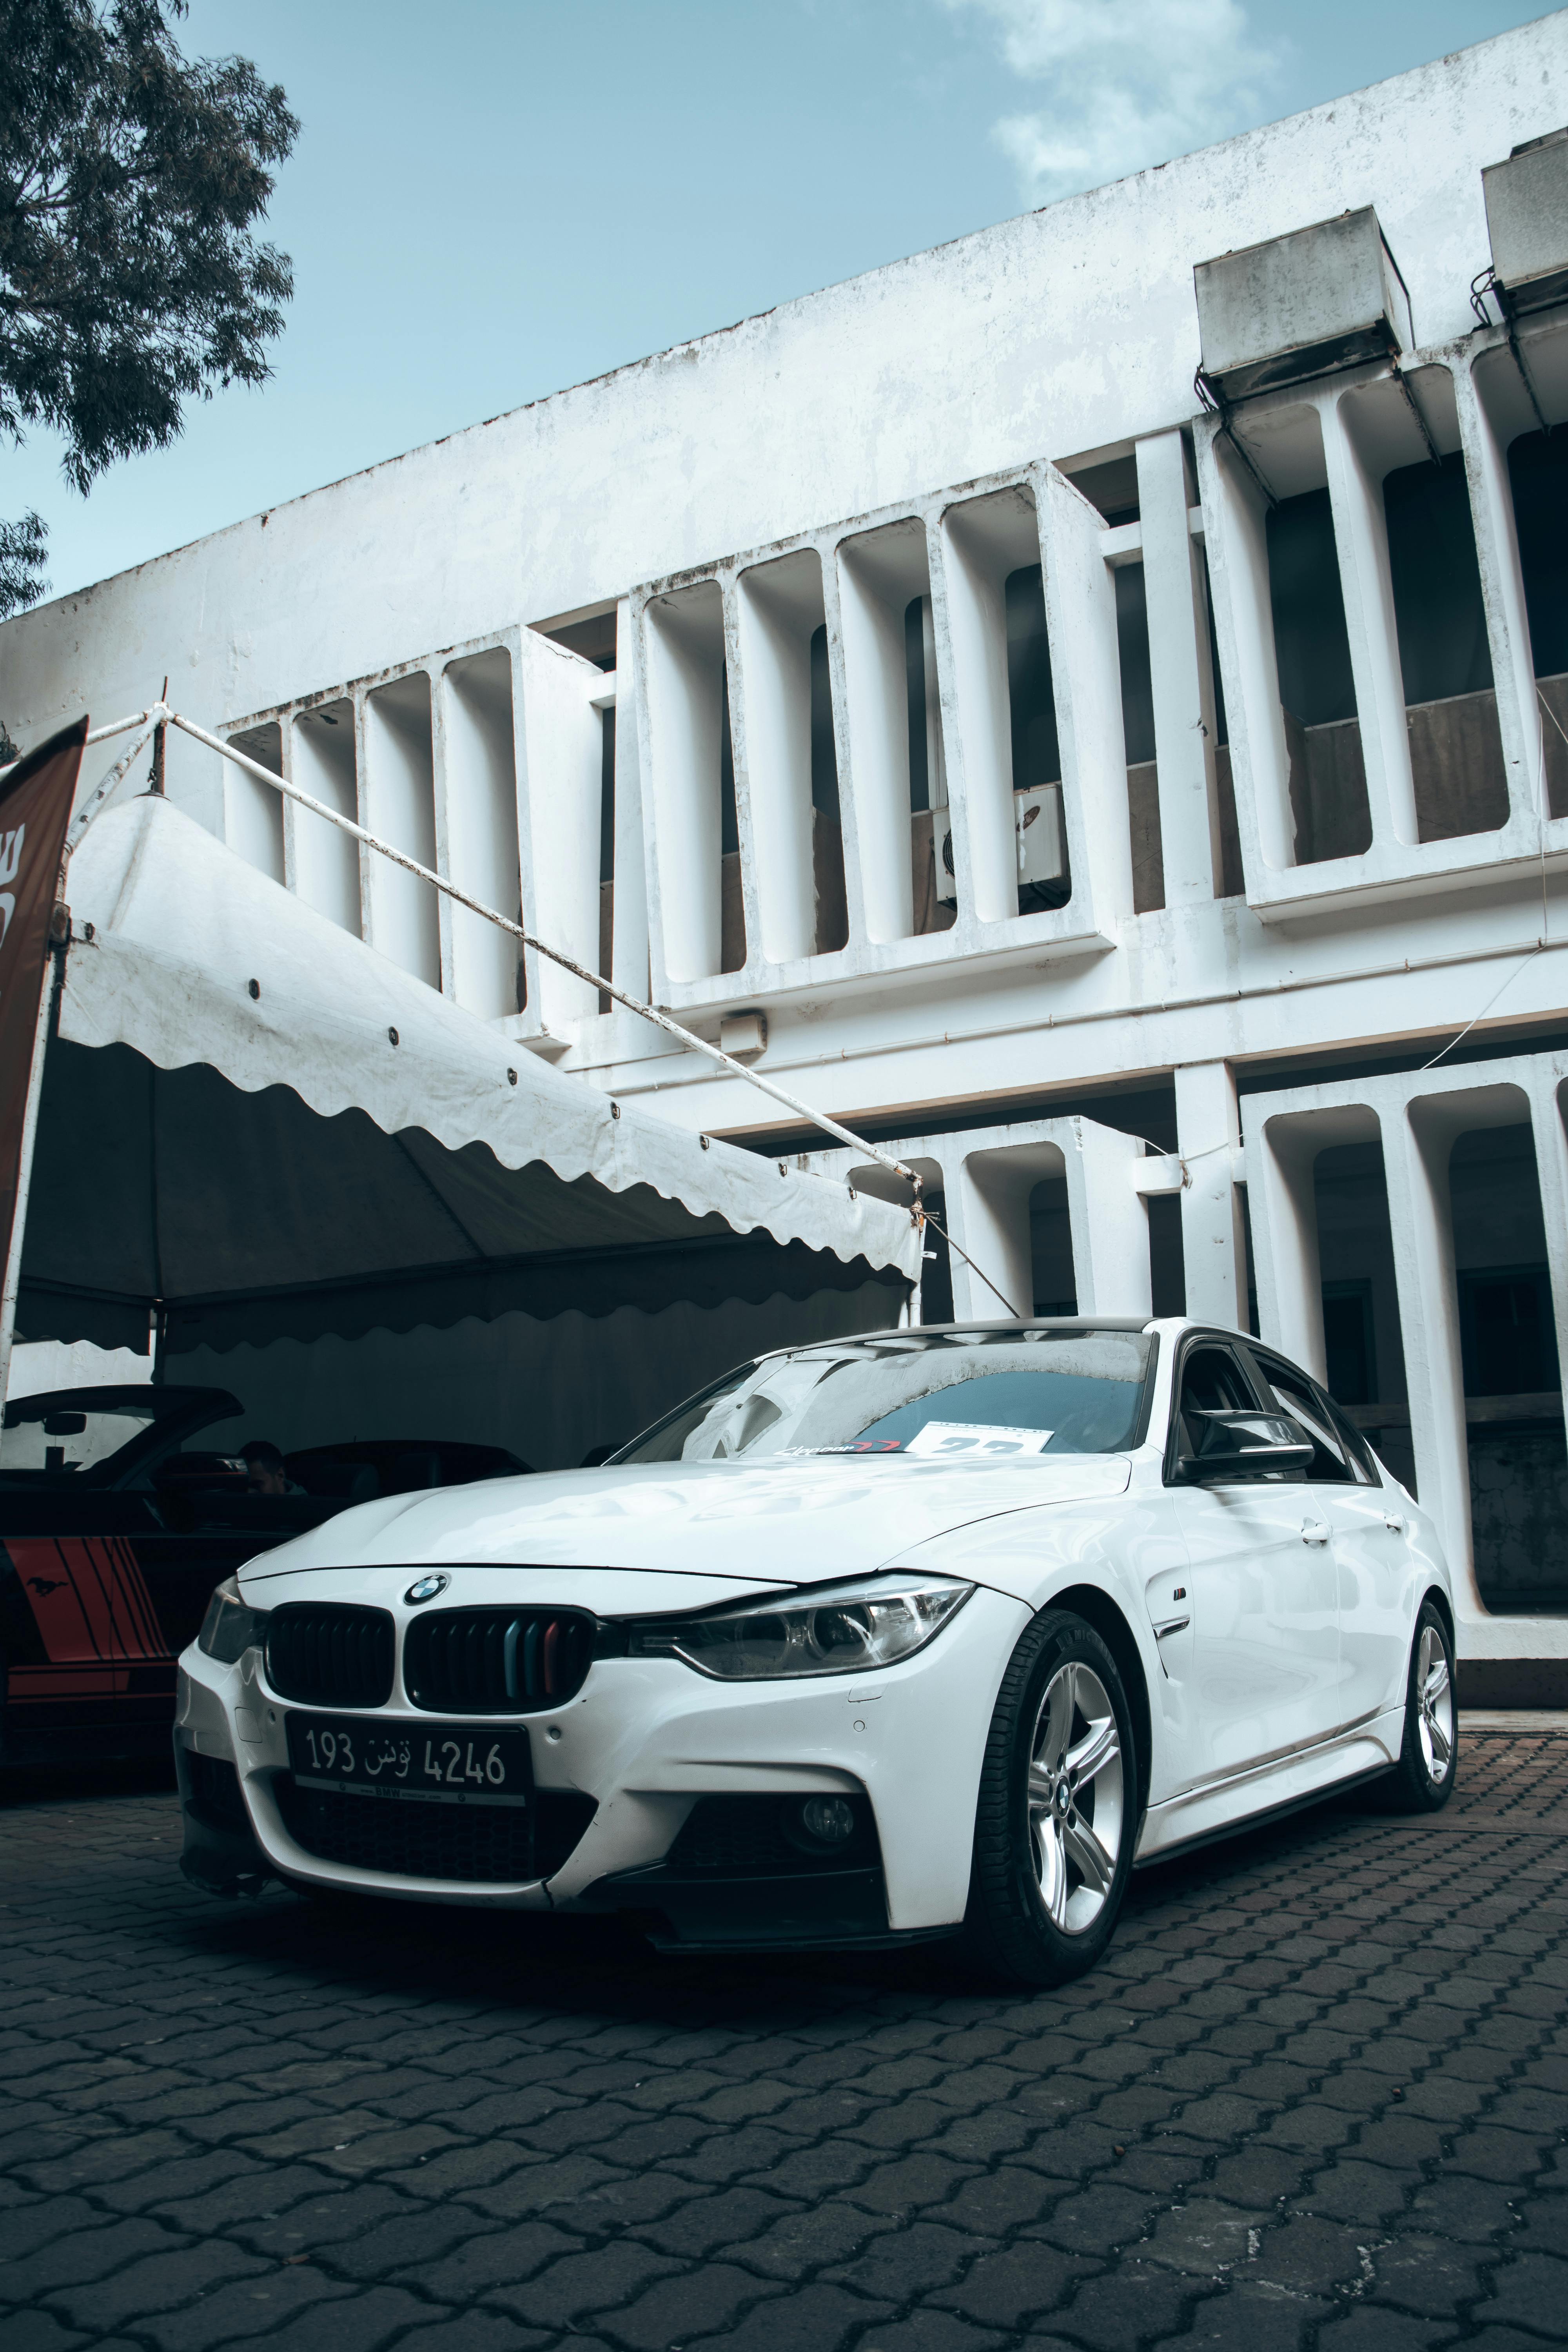 Bmw F30 Photos, Download The BEST Free Bmw F30 Stock Photos & HD Images